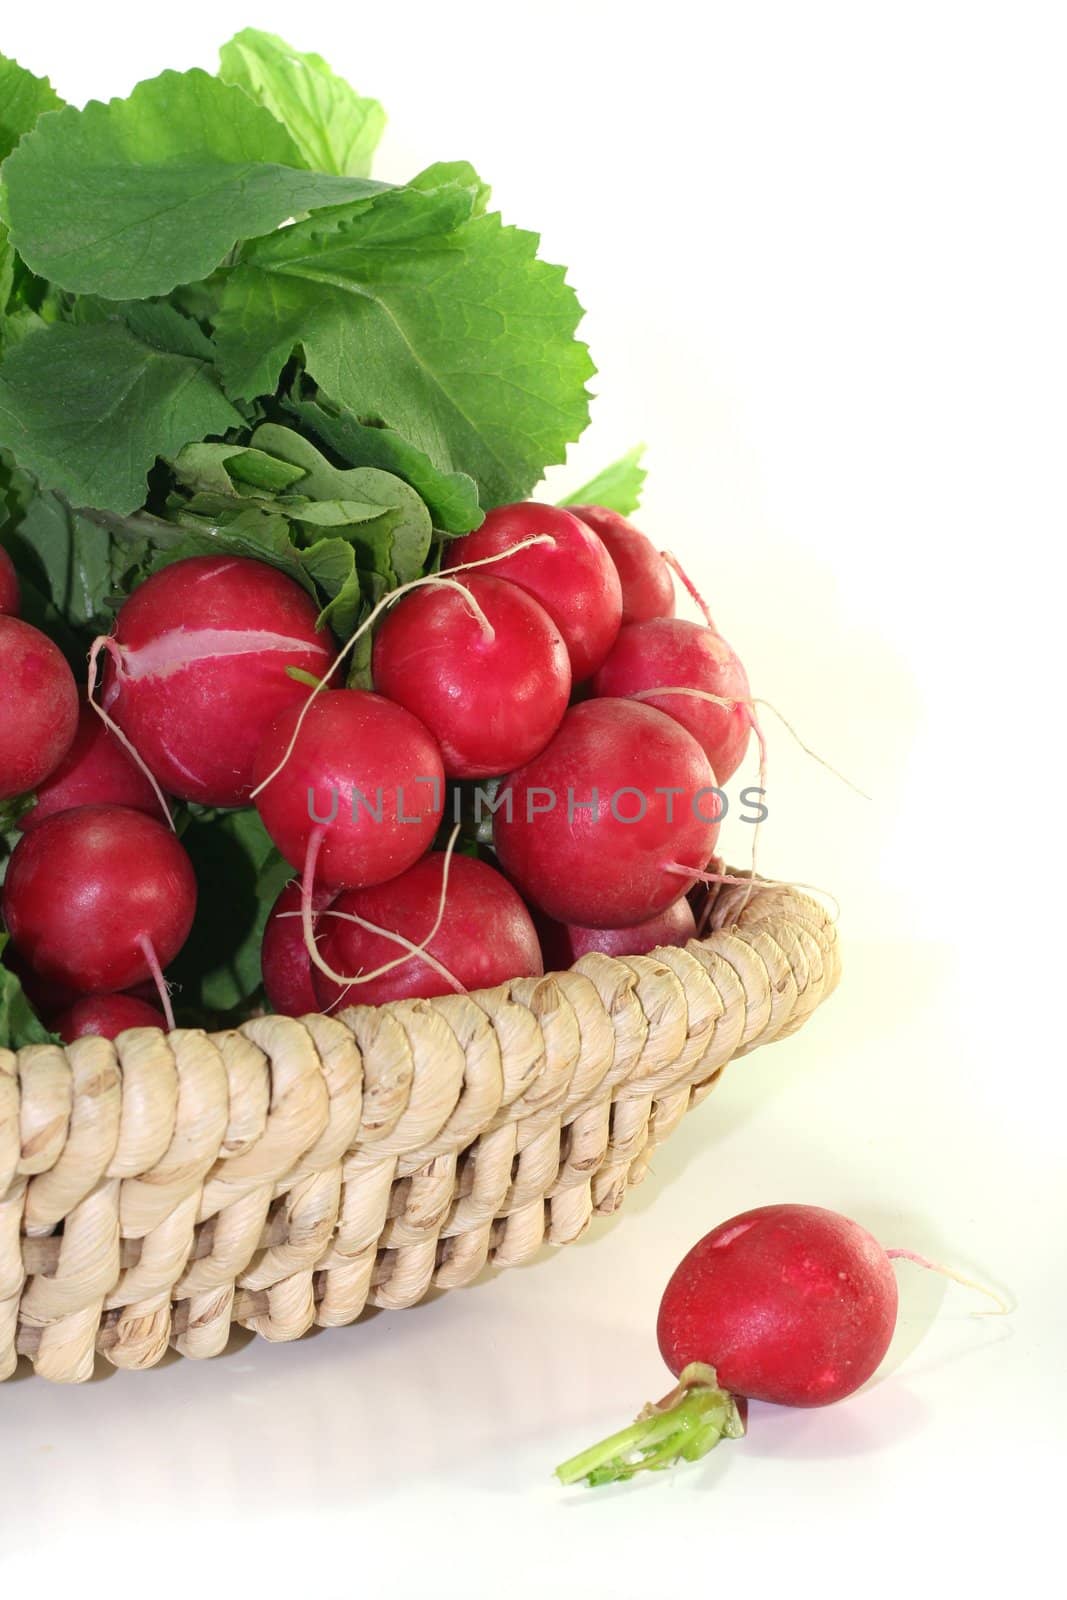 fresh radishes with green leaves in a basket